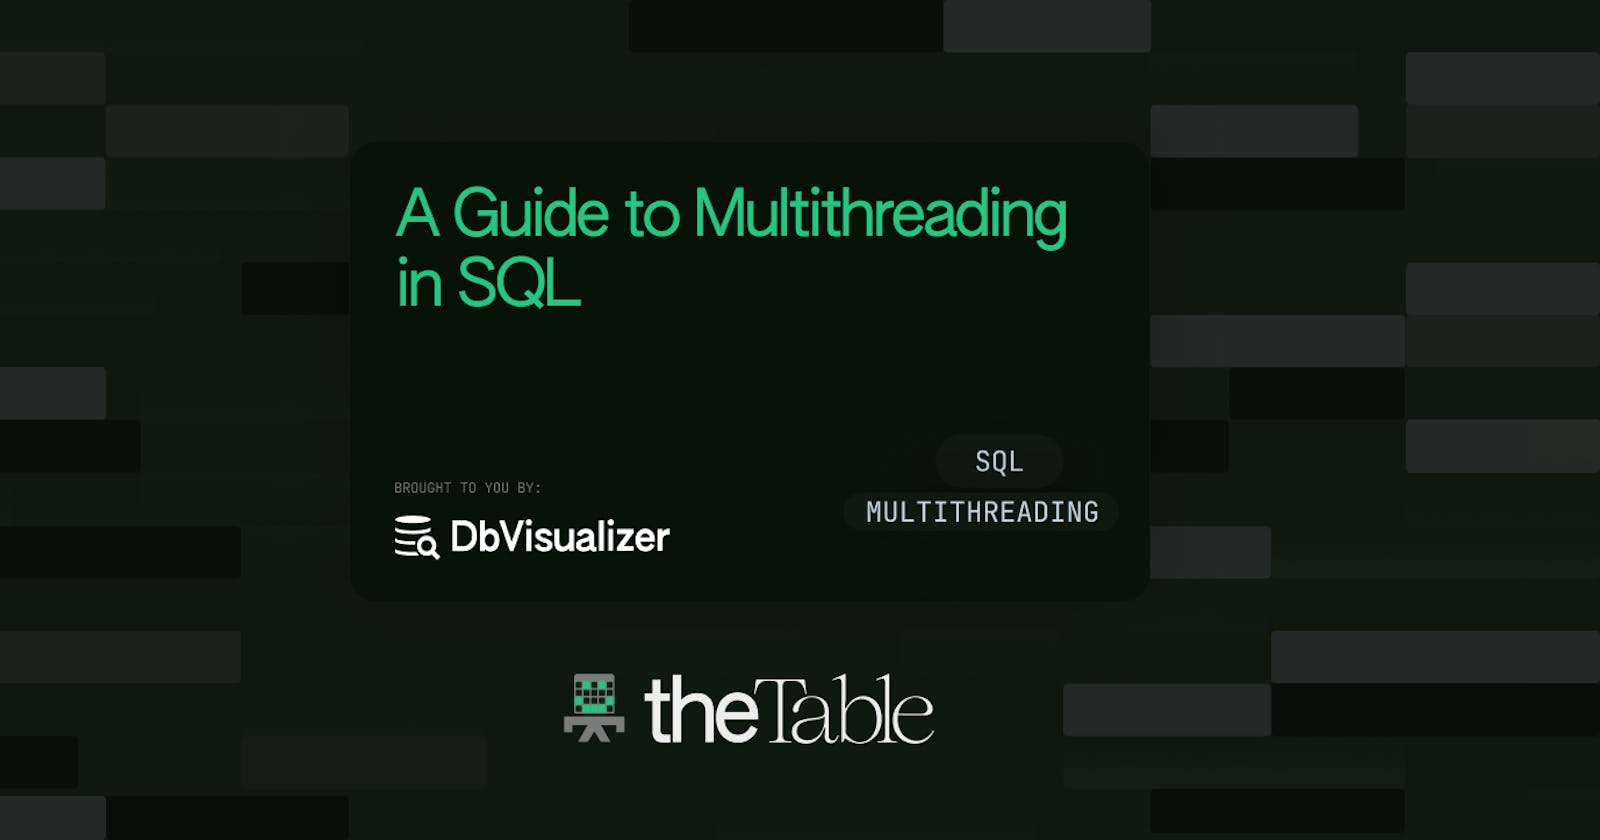 A Guide to Multithreading in SQL